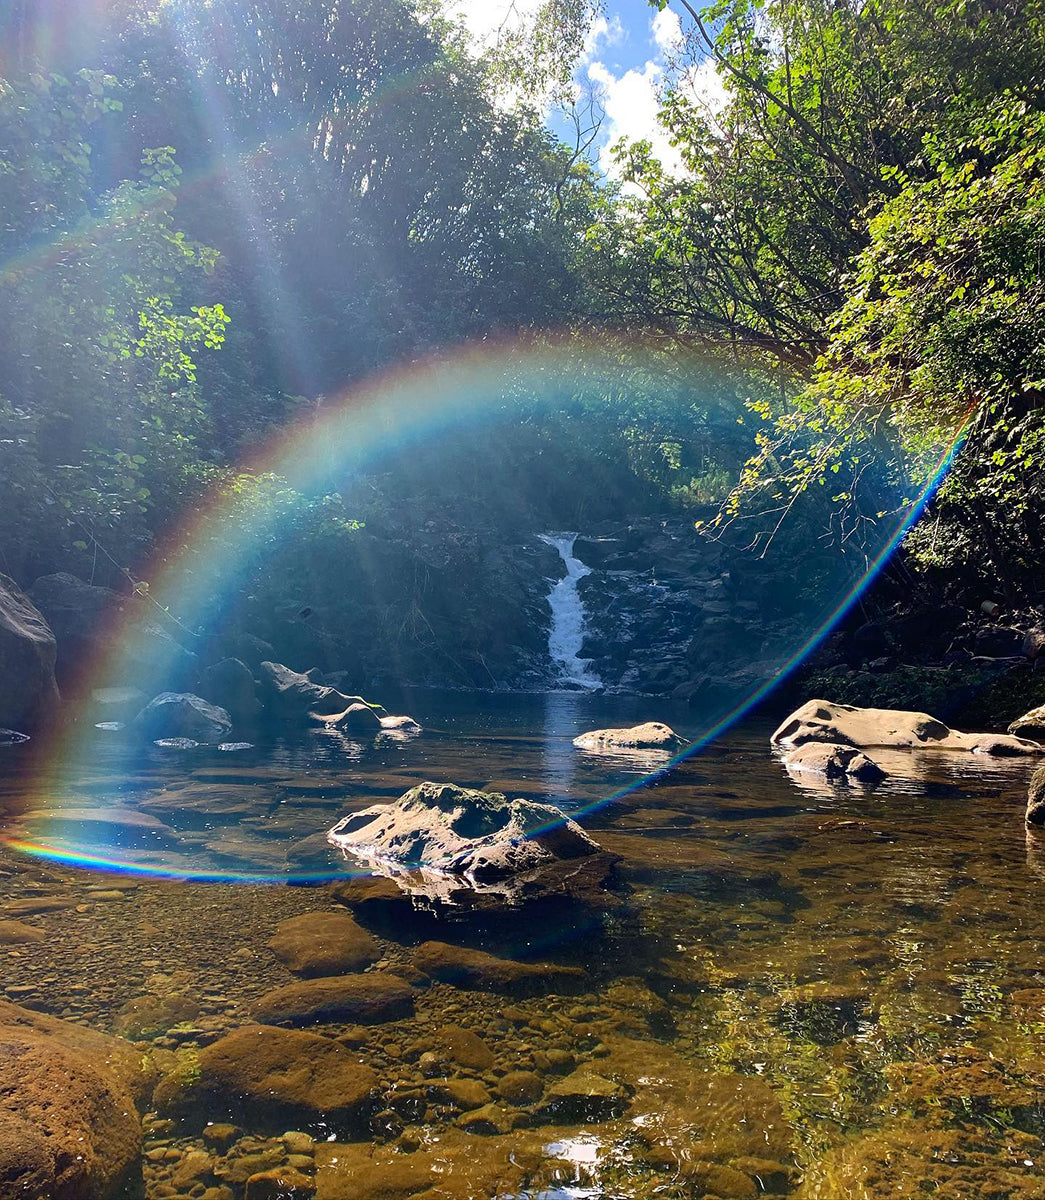 A ray of light hits the camera lens to create a rainbow over the waterfall.